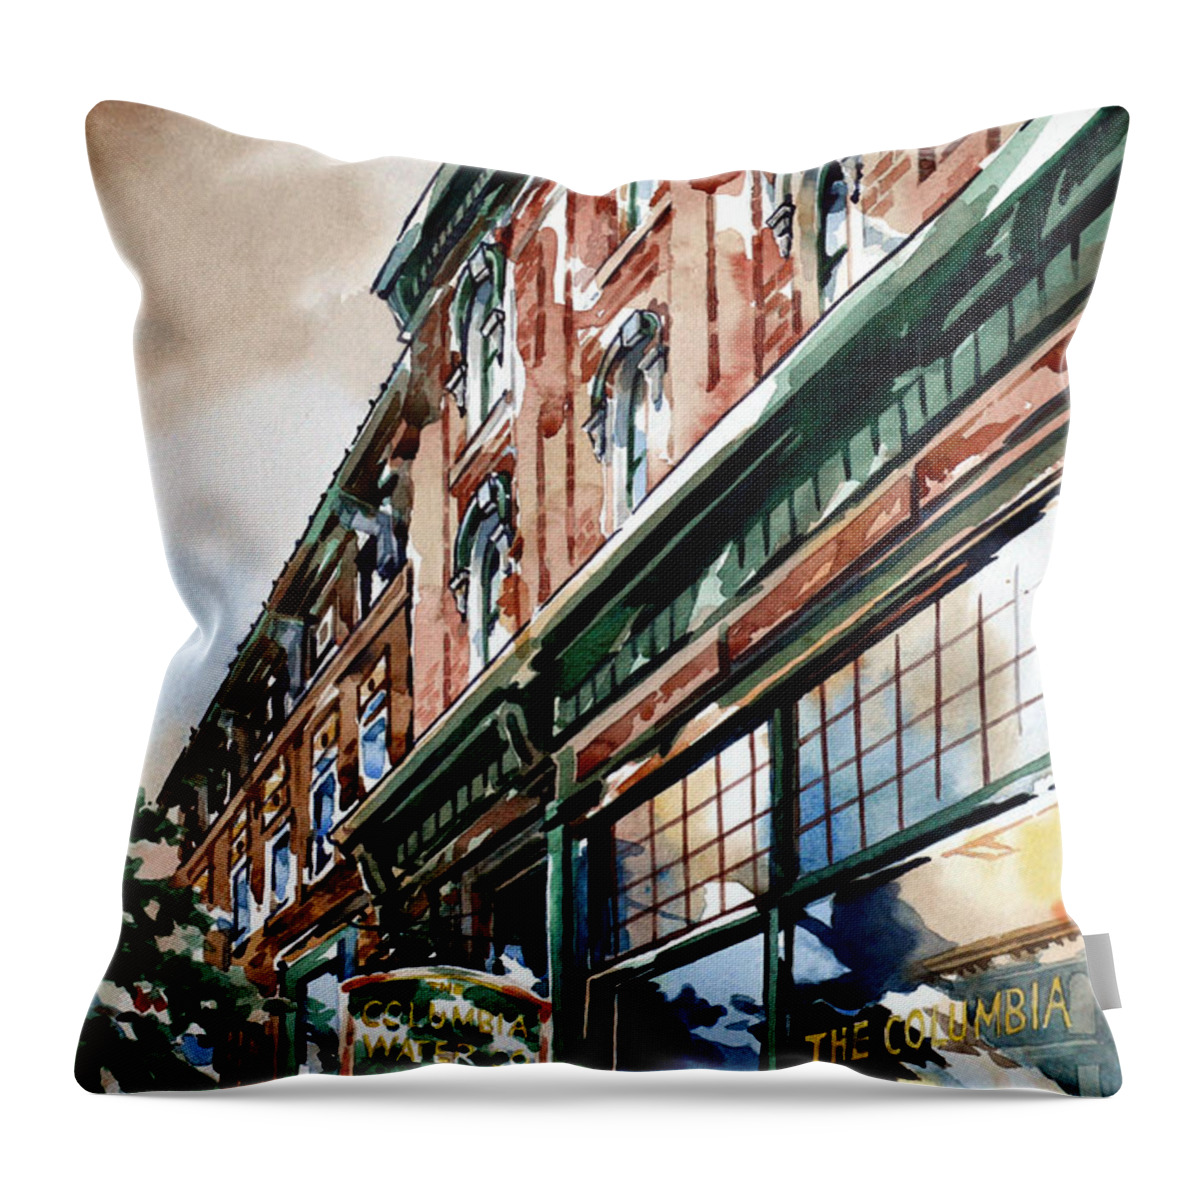 #watercolor #landscape #cityscape #columbia #columbiapa #oldbuildings #columbiawater Throw Pillow featuring the painting Columbia Water by Mick Williams